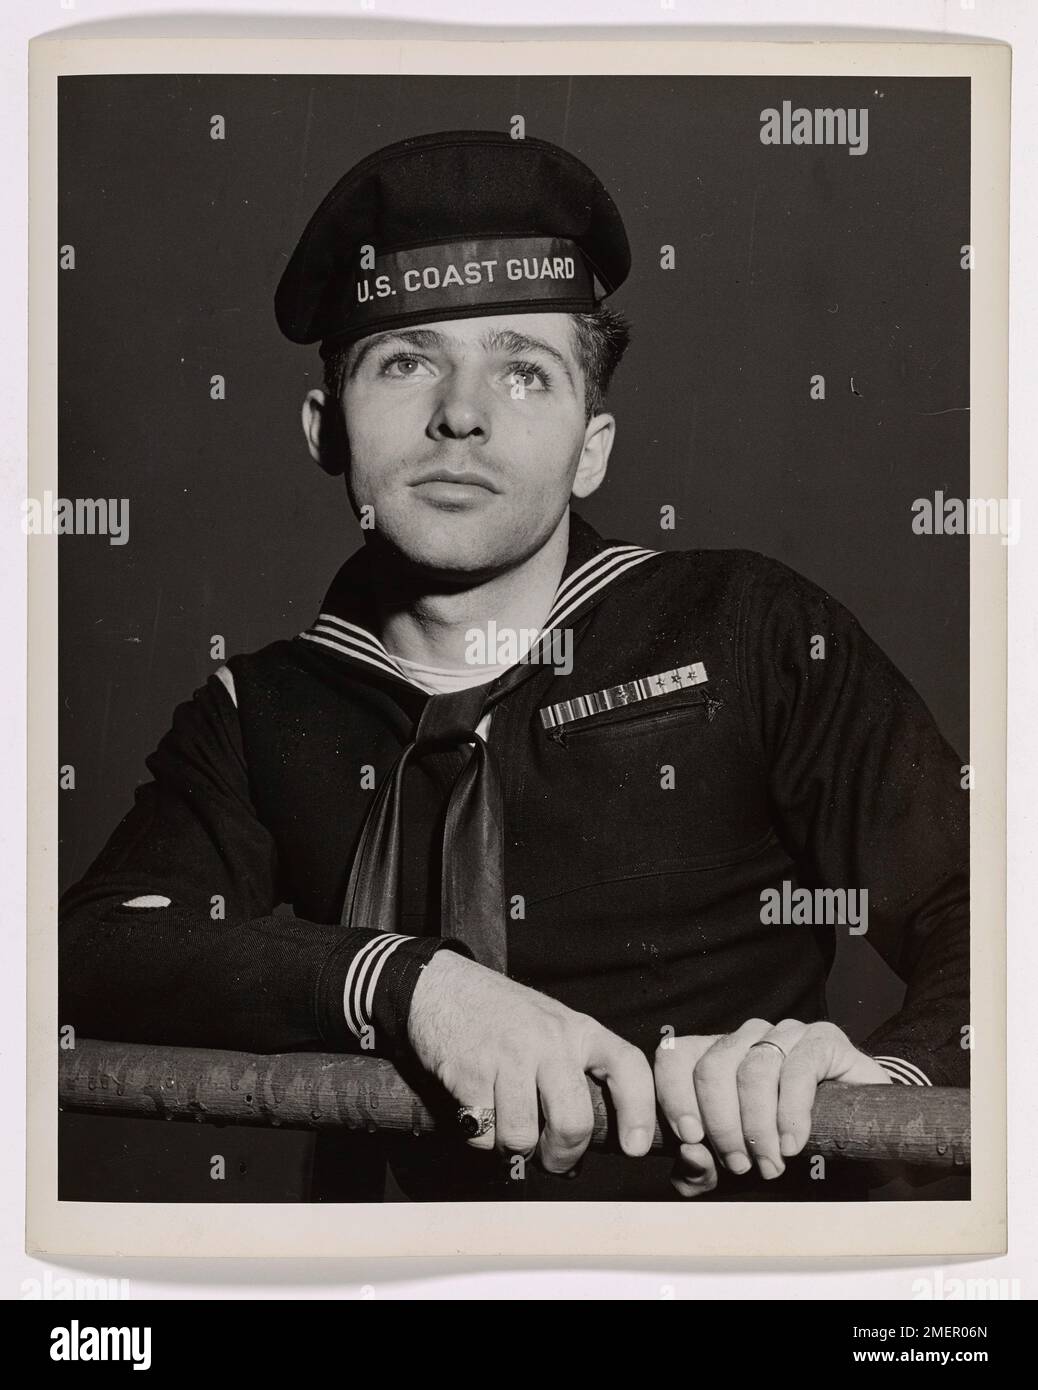 Legion nominates 'Typical Coast Guardsman'. This image depicts artwork of Coast Guard Combat Artist Bruno Figallo, photographed by the American Legion. Stock Photo